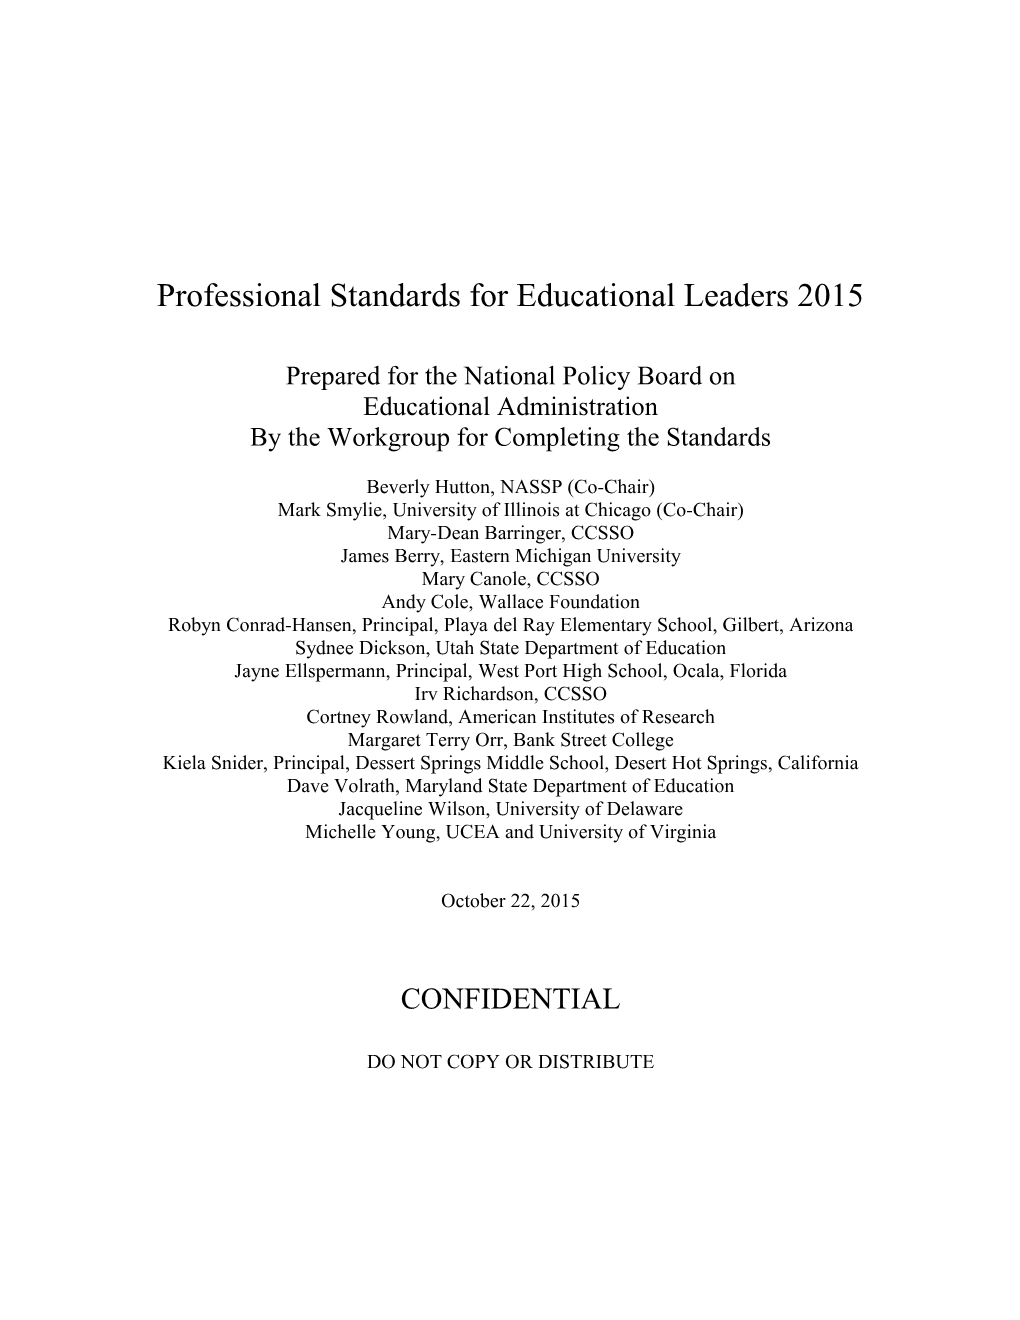 Professional Standards for Educational Leaders 2015